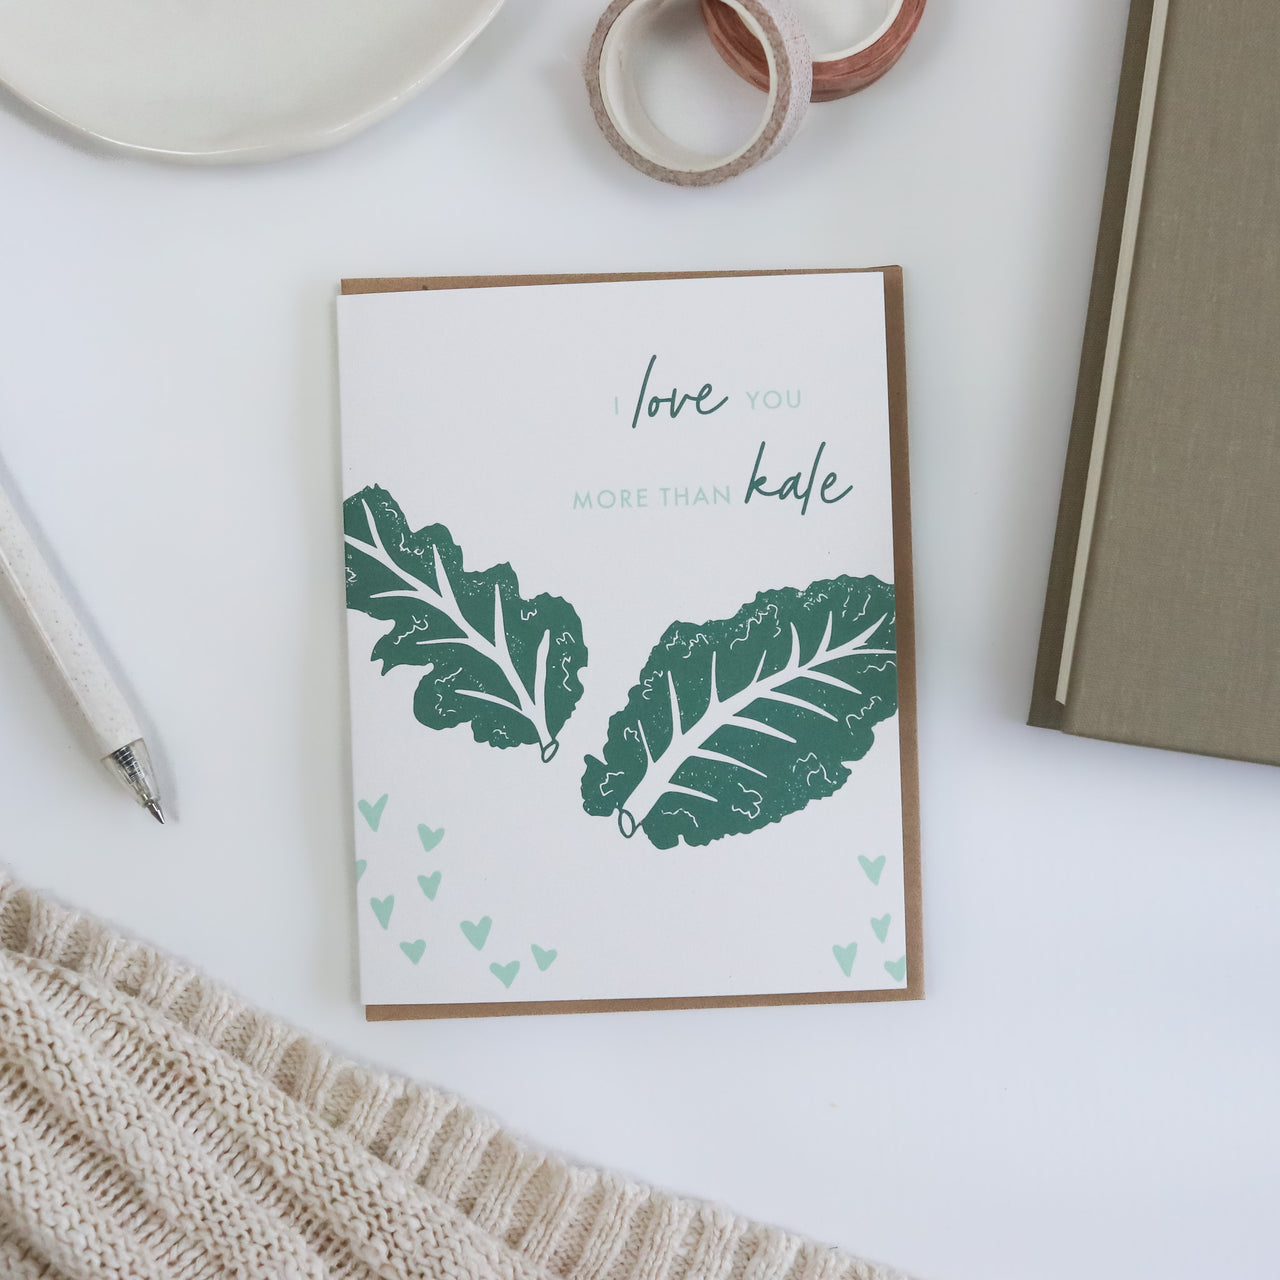 Love You More Than Kale Card | Overflow & Co.